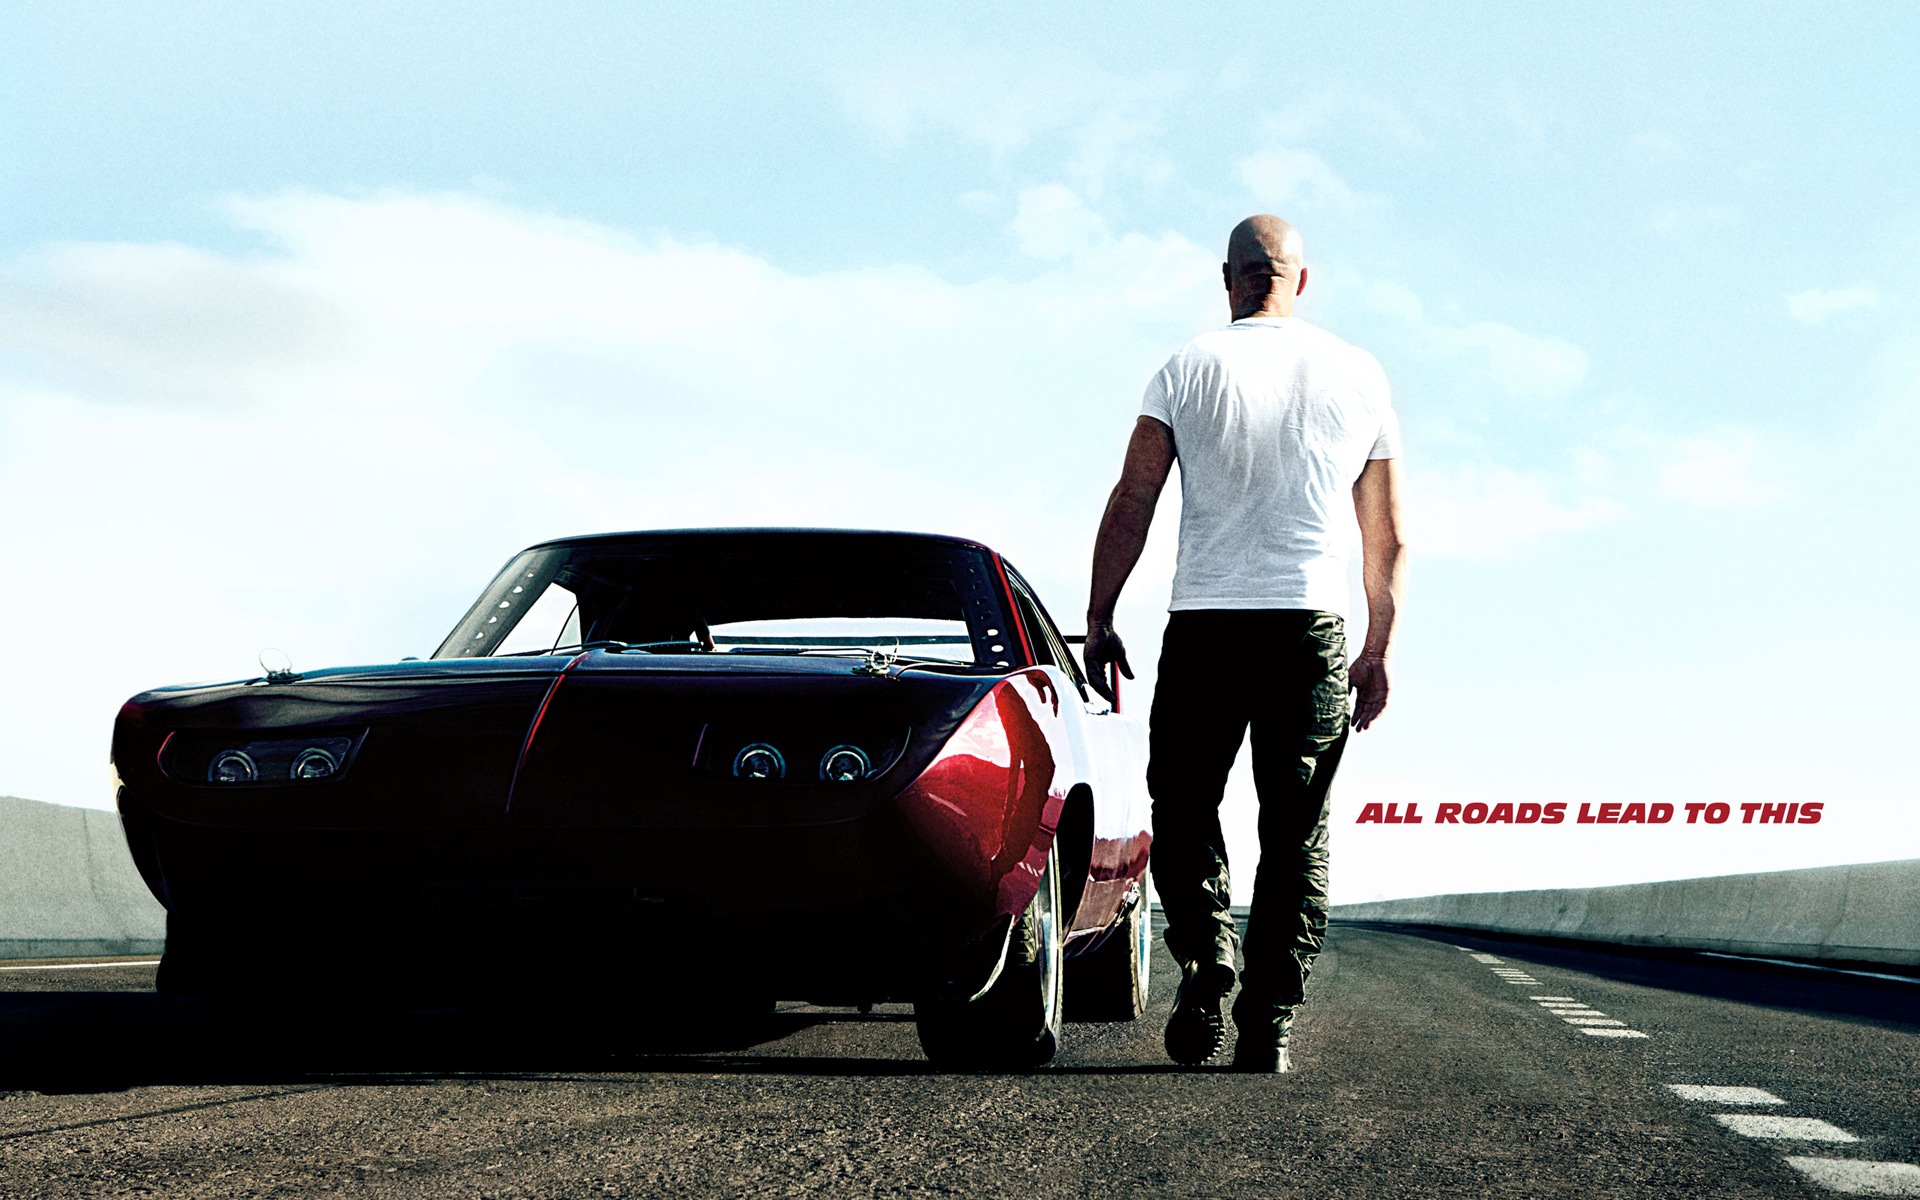 Fast And Furious 6 HD movie wallpapers #11 - 1920x1200